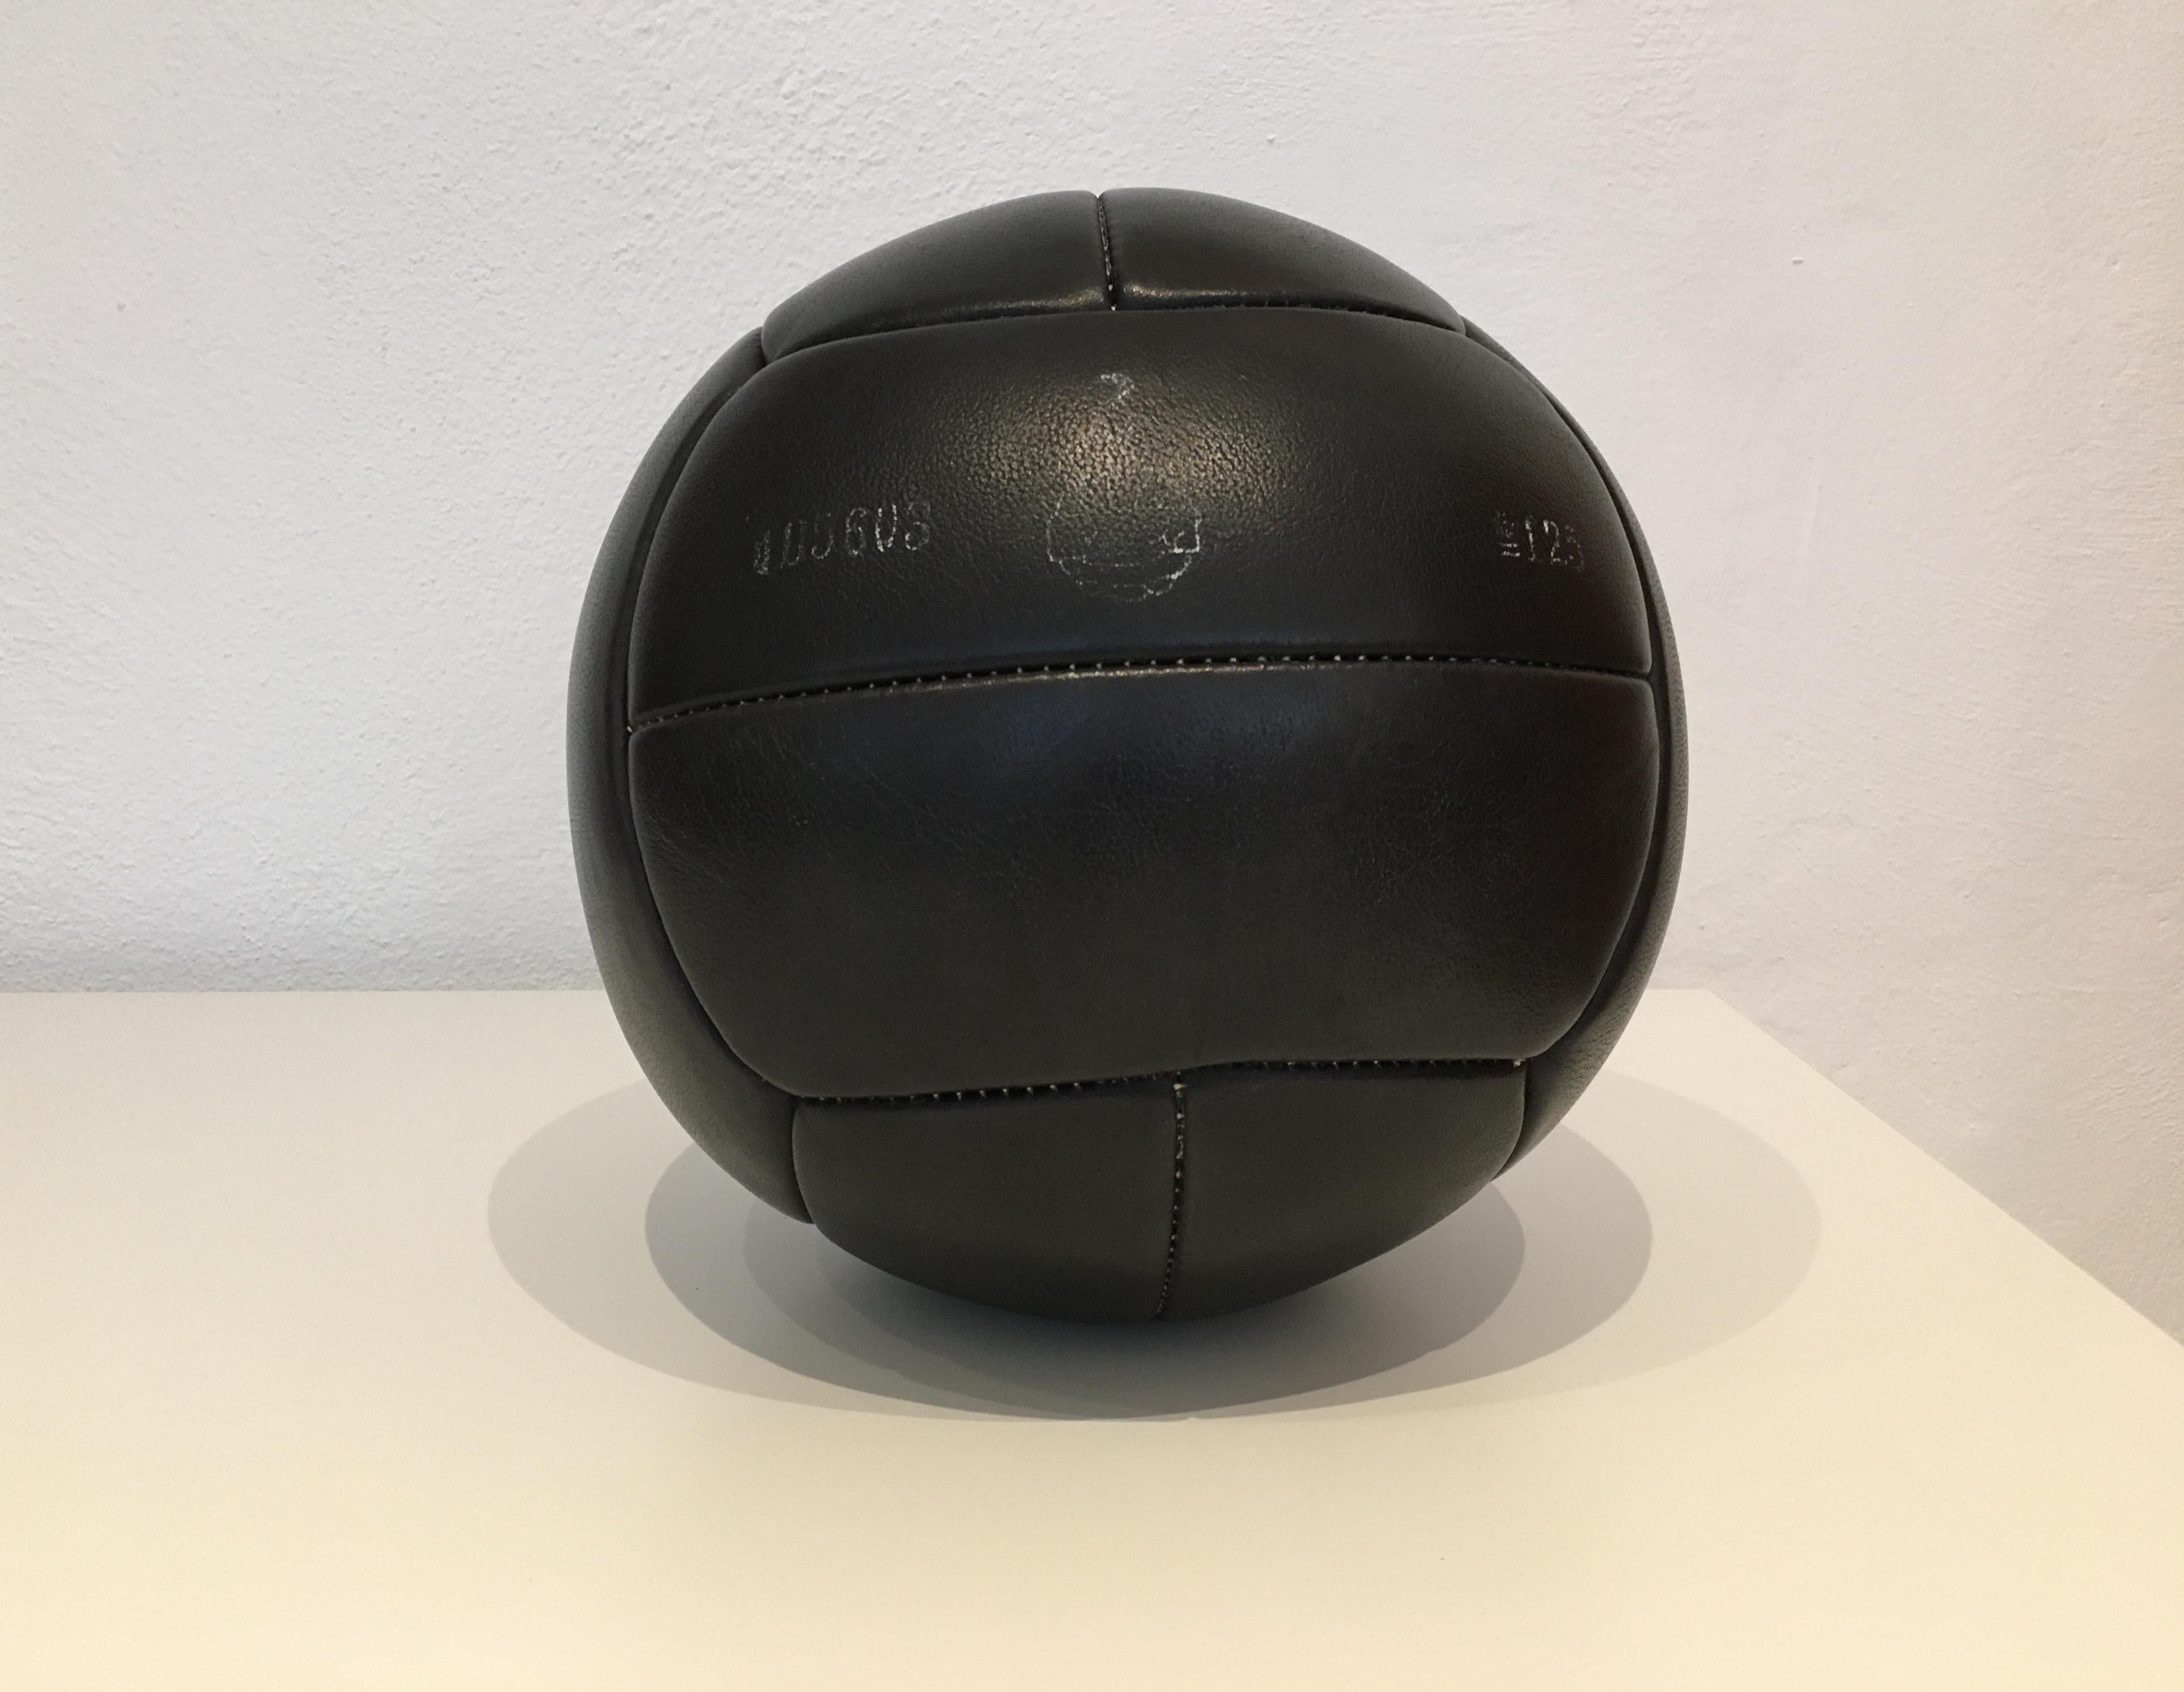 This medicine ball comes from the stock of an old Czech gymnasium. Made in the 1930s. Patina consistent with age and use. Cleaned and treated with a special leather care. Weight: 3kg. Measures: Diameter 10.2 inch.